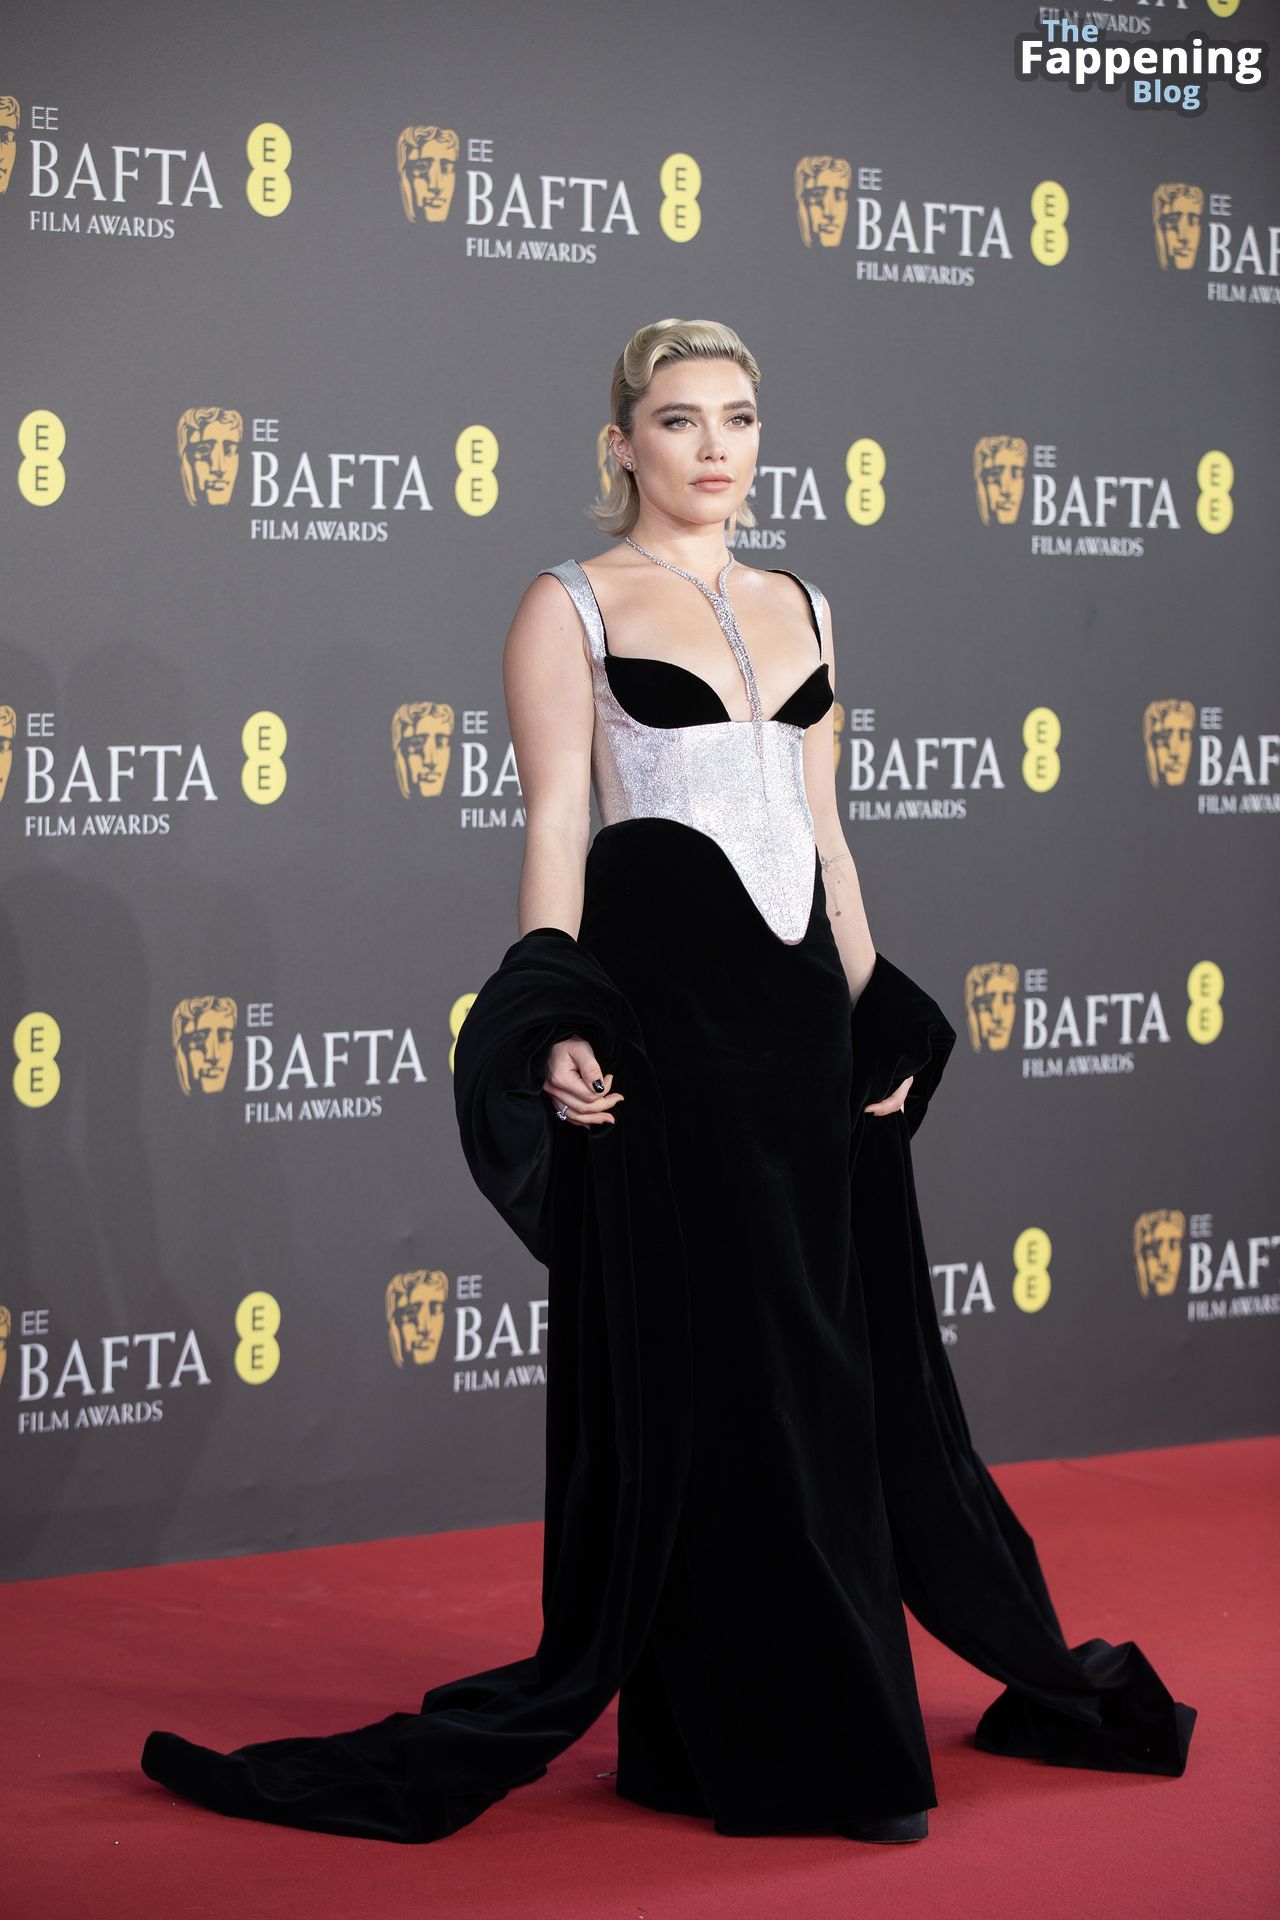 Florence-Pugh-Sexy-64-The-Fappening-Blog-1.jpg